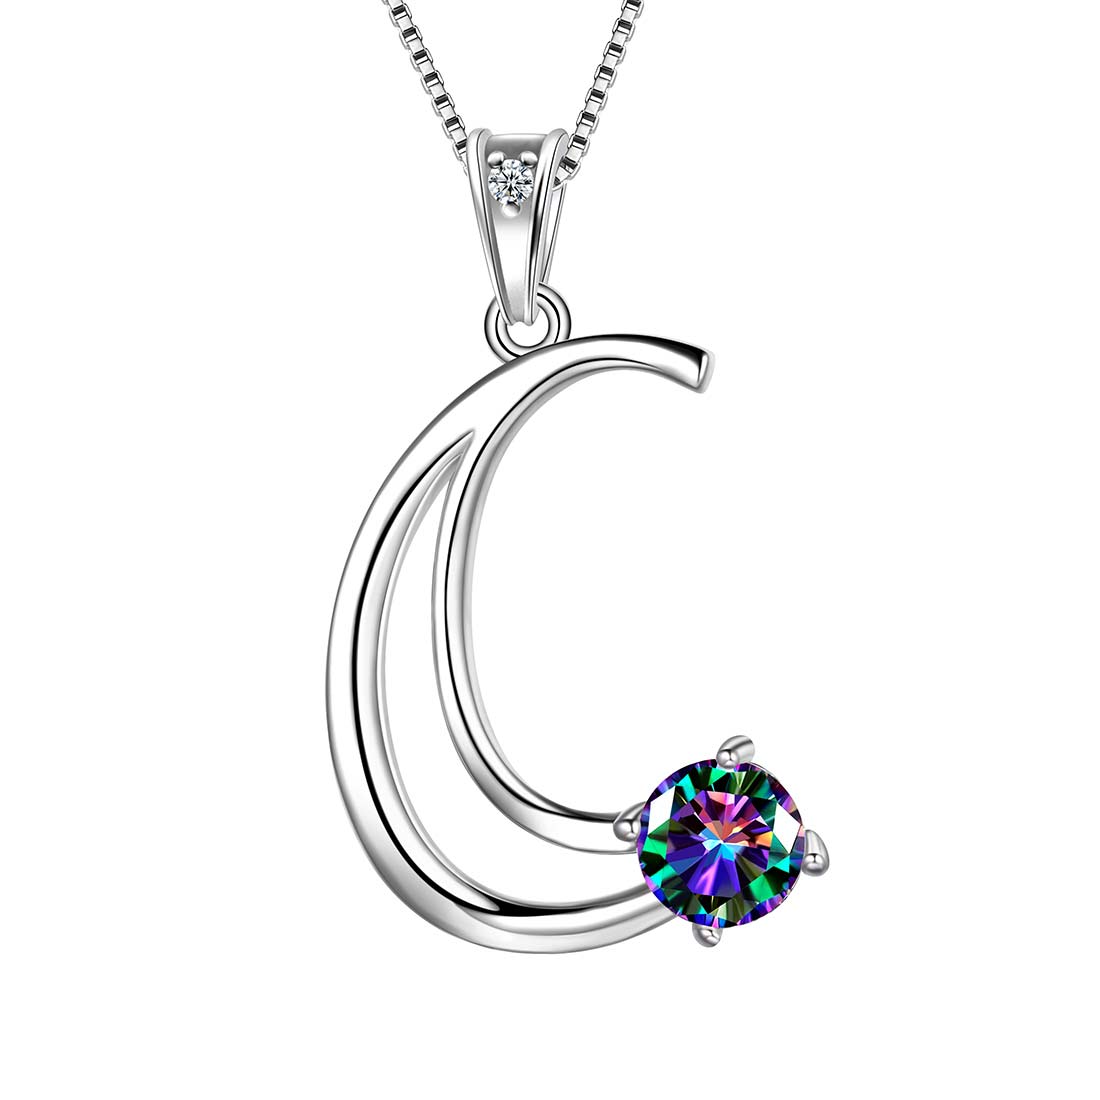 Women Letter C Initial Necklaces Sterling Silver - Necklaces - Aurora Tears Jewelry